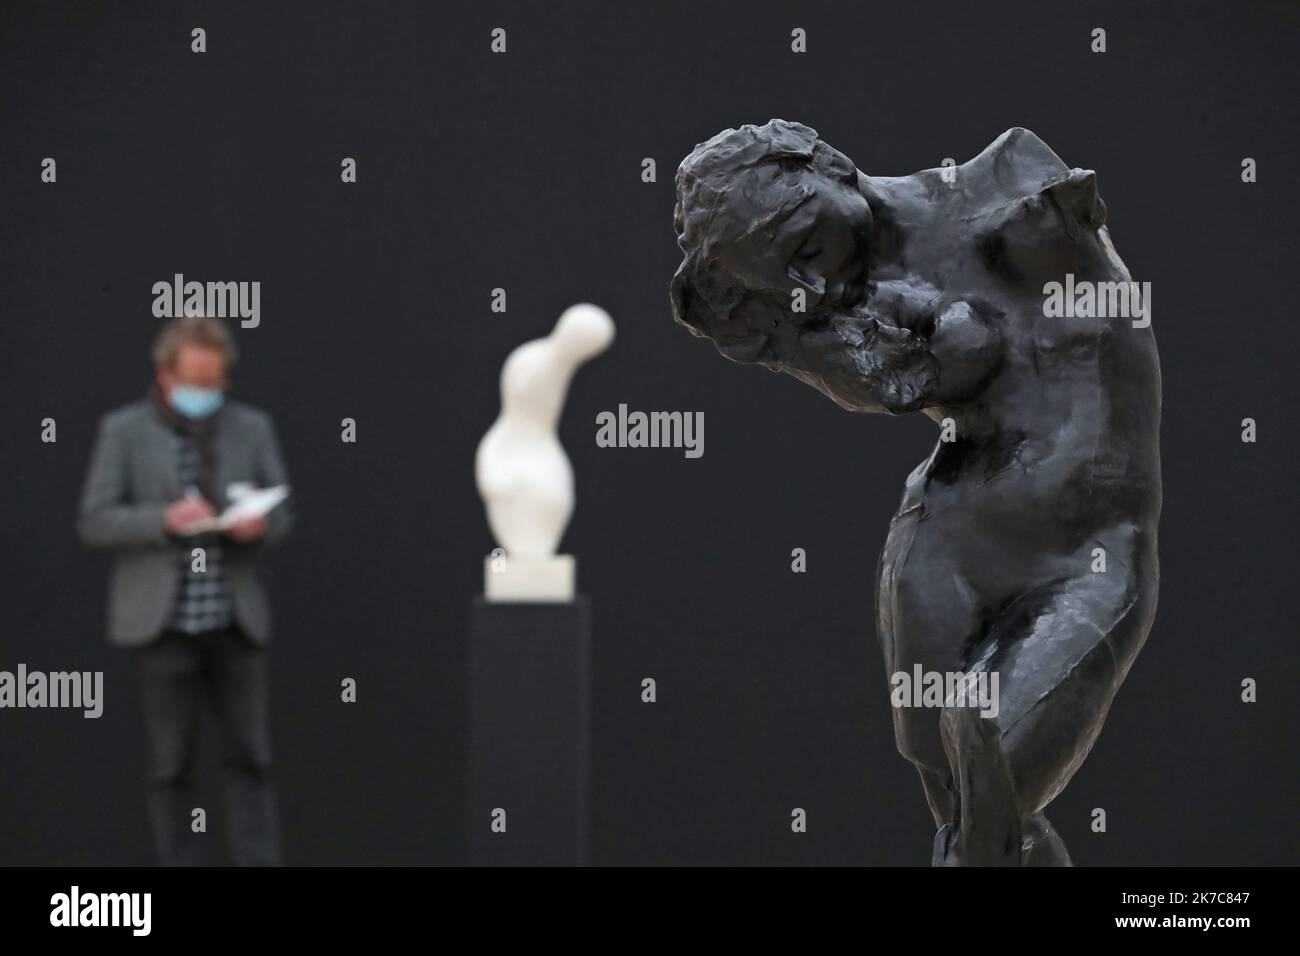 ©PHOTOPQR/L'ALSACE/Darek SZUSTER ; Riehen ; 11/12/2020 ; L'exposition Rodin Arp va ouvrir au public ce Week-End à la Fondation Beyeler. - 2020/12/11. For the first time, a museum exhibition brings into dialogue Auguste Rodin (1840–1917) and Hans Arp (1886–1966), pairing the groundbreaking work of late 19th-century sculpture’s great reformer with the influential work of a major protagonist of 20th-century abstract sculpture. Stock Photo